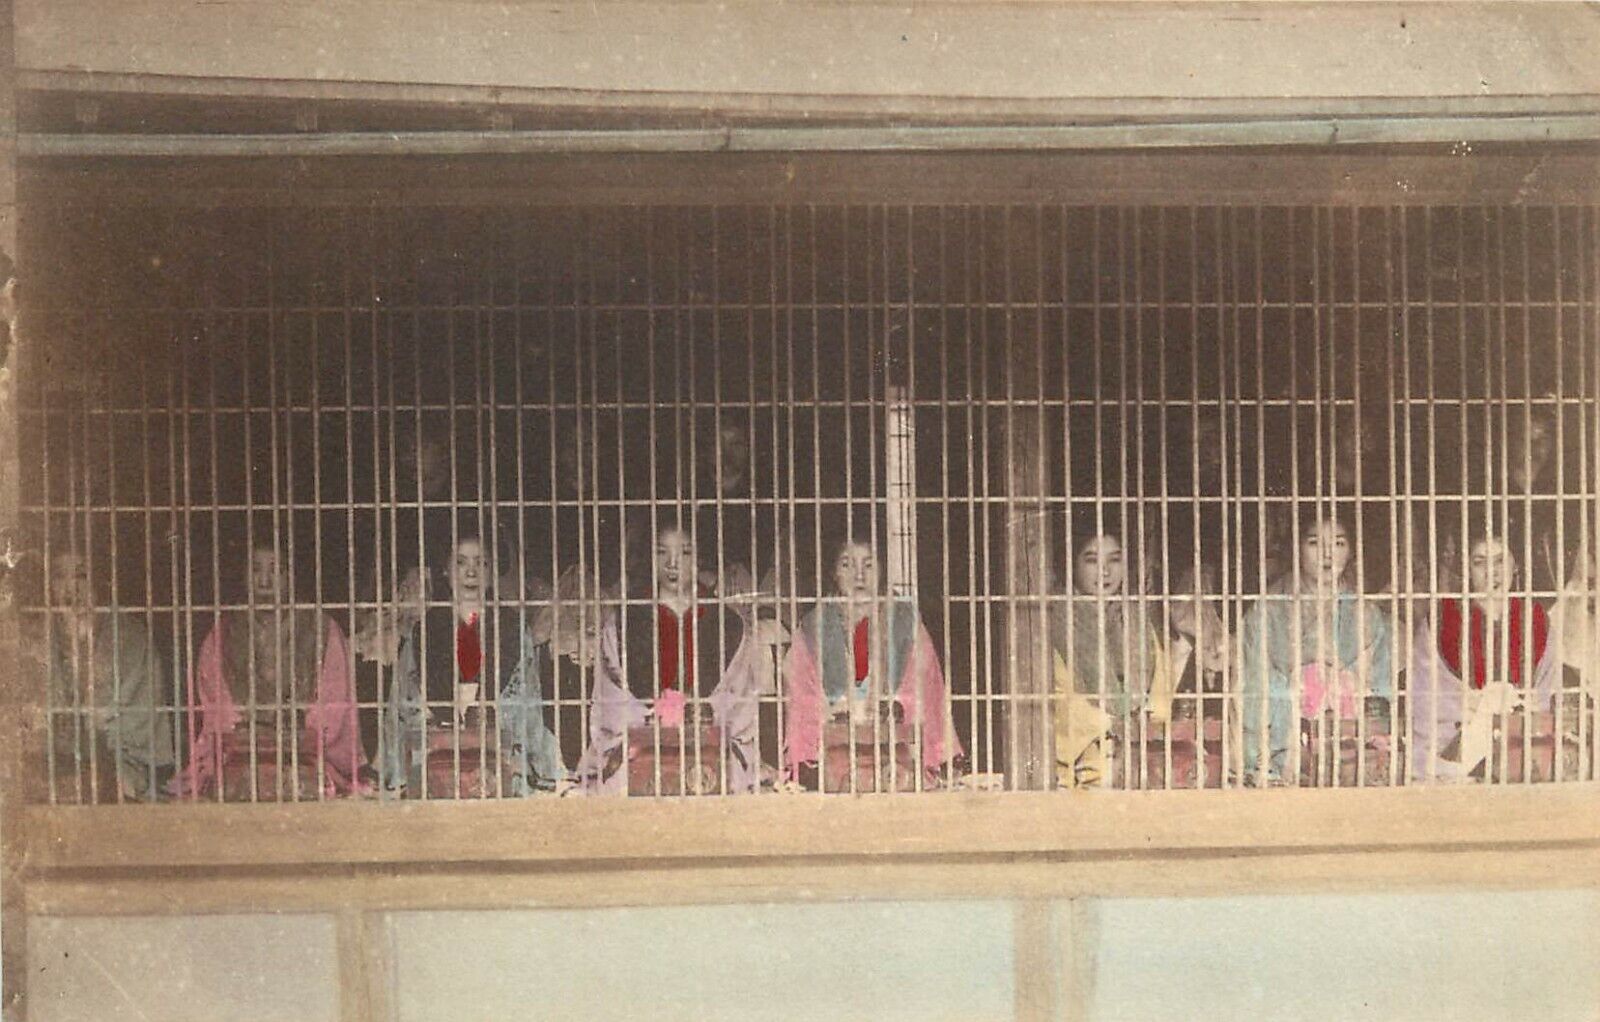 Hand-Colored Postcard, Women on Display, Japan Red Light District, Prostitution